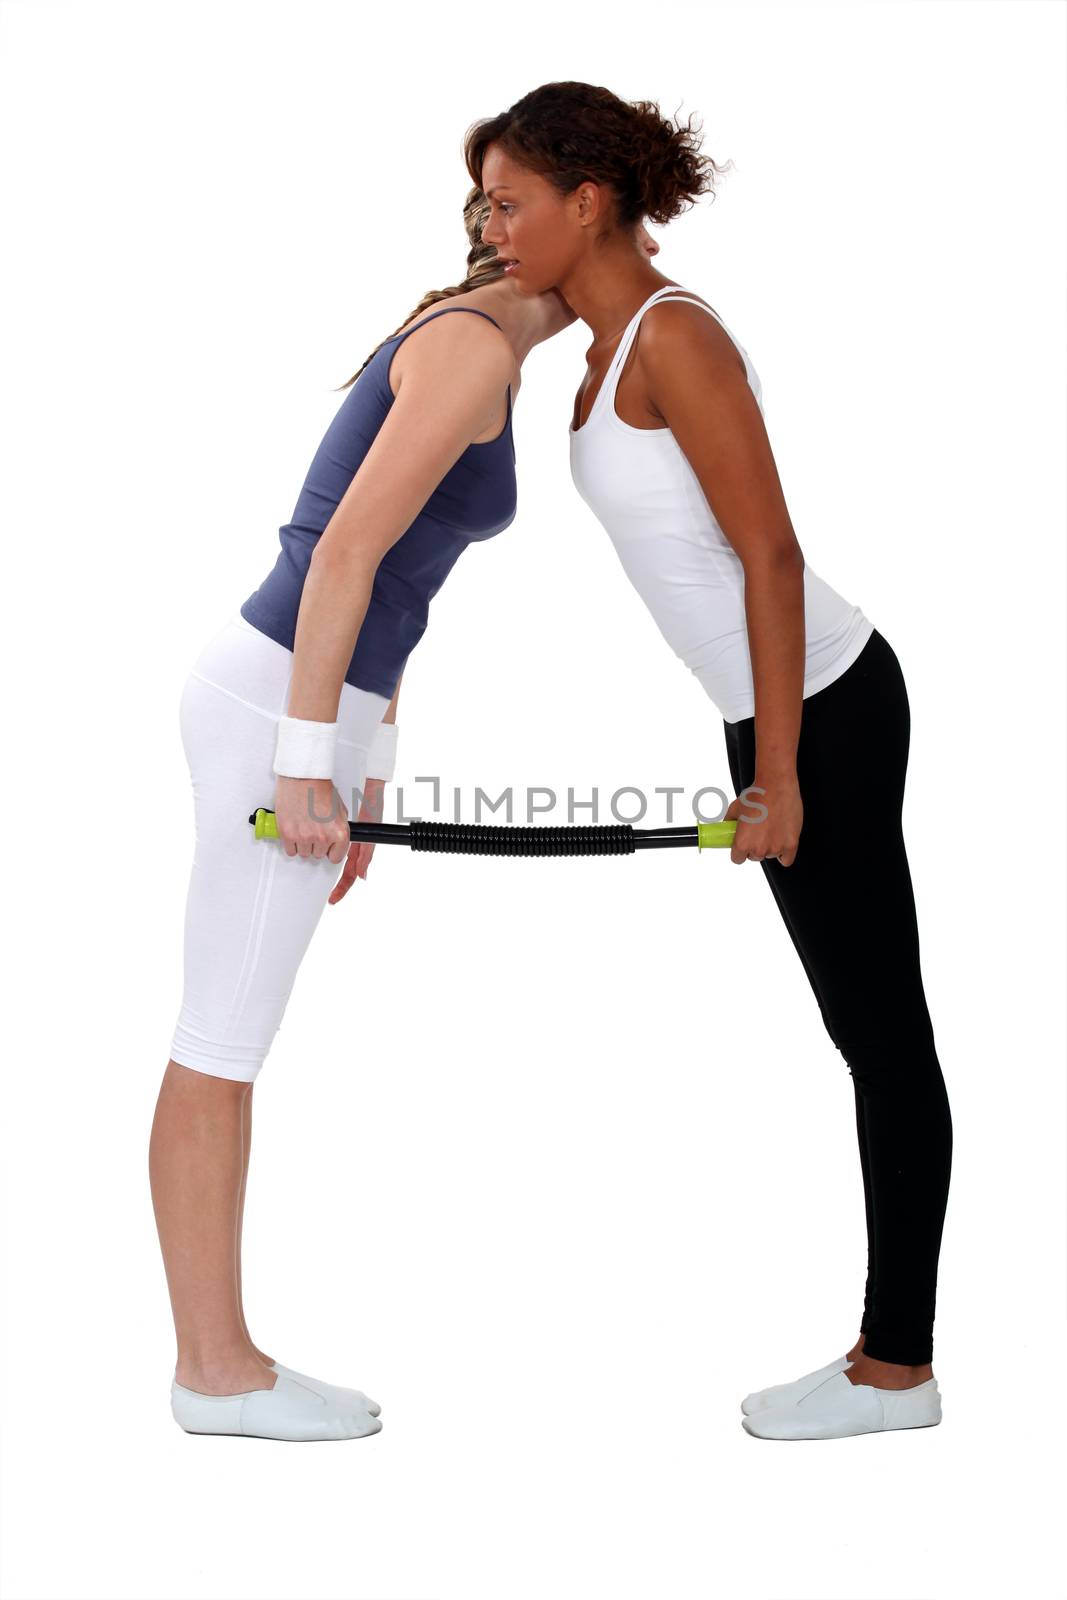 women doing exercises together by phovoir